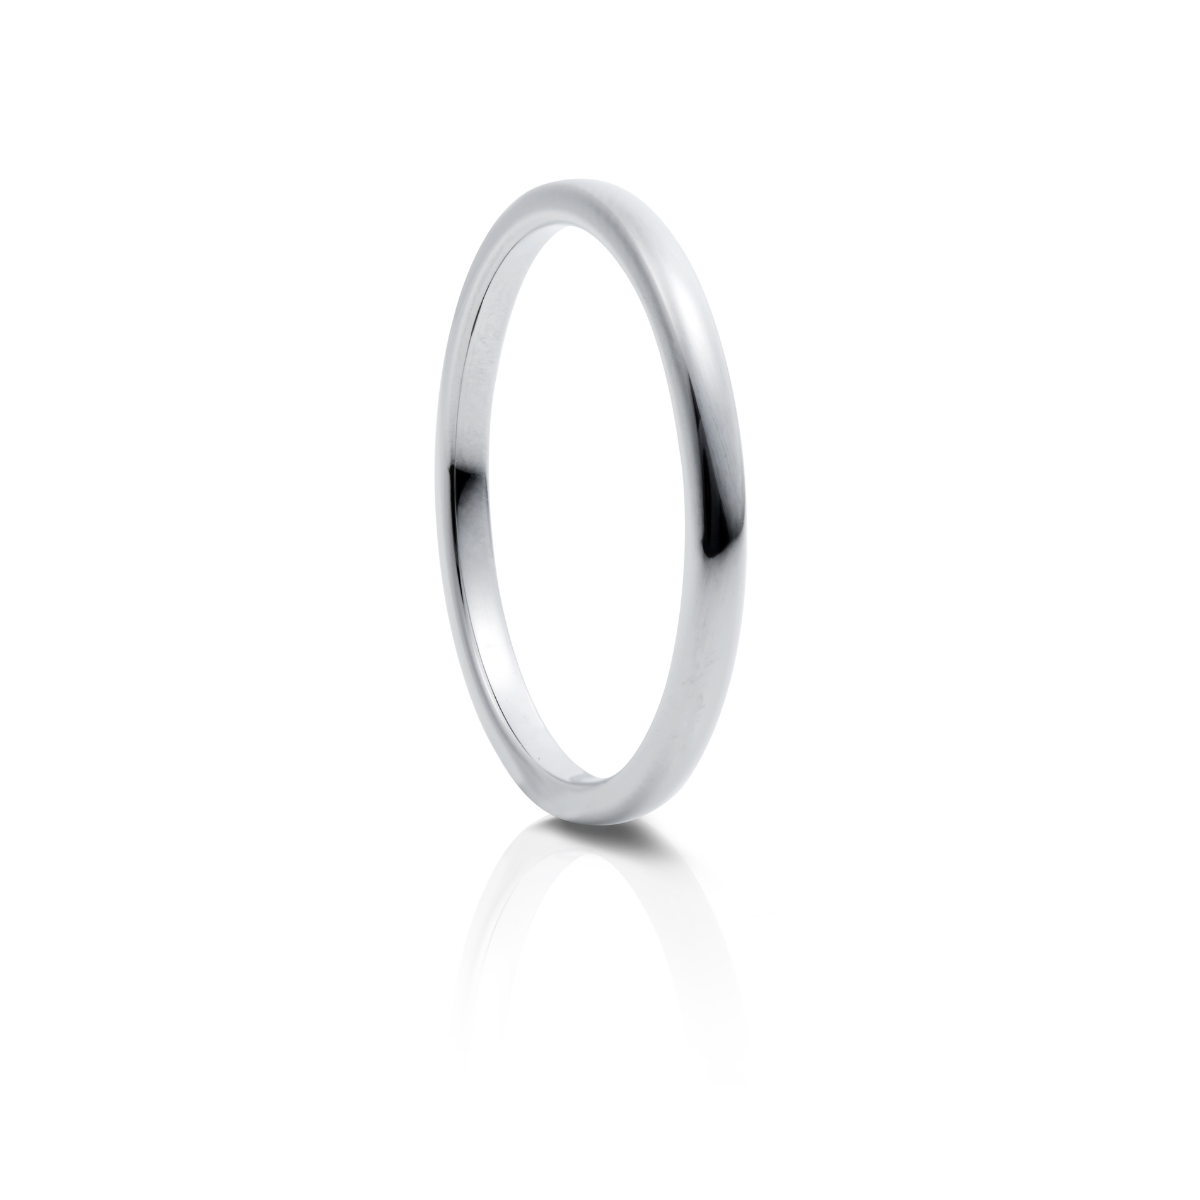 Our 8mm rings are crafted to make a bold and confident statement, combining strength with style in every detail.